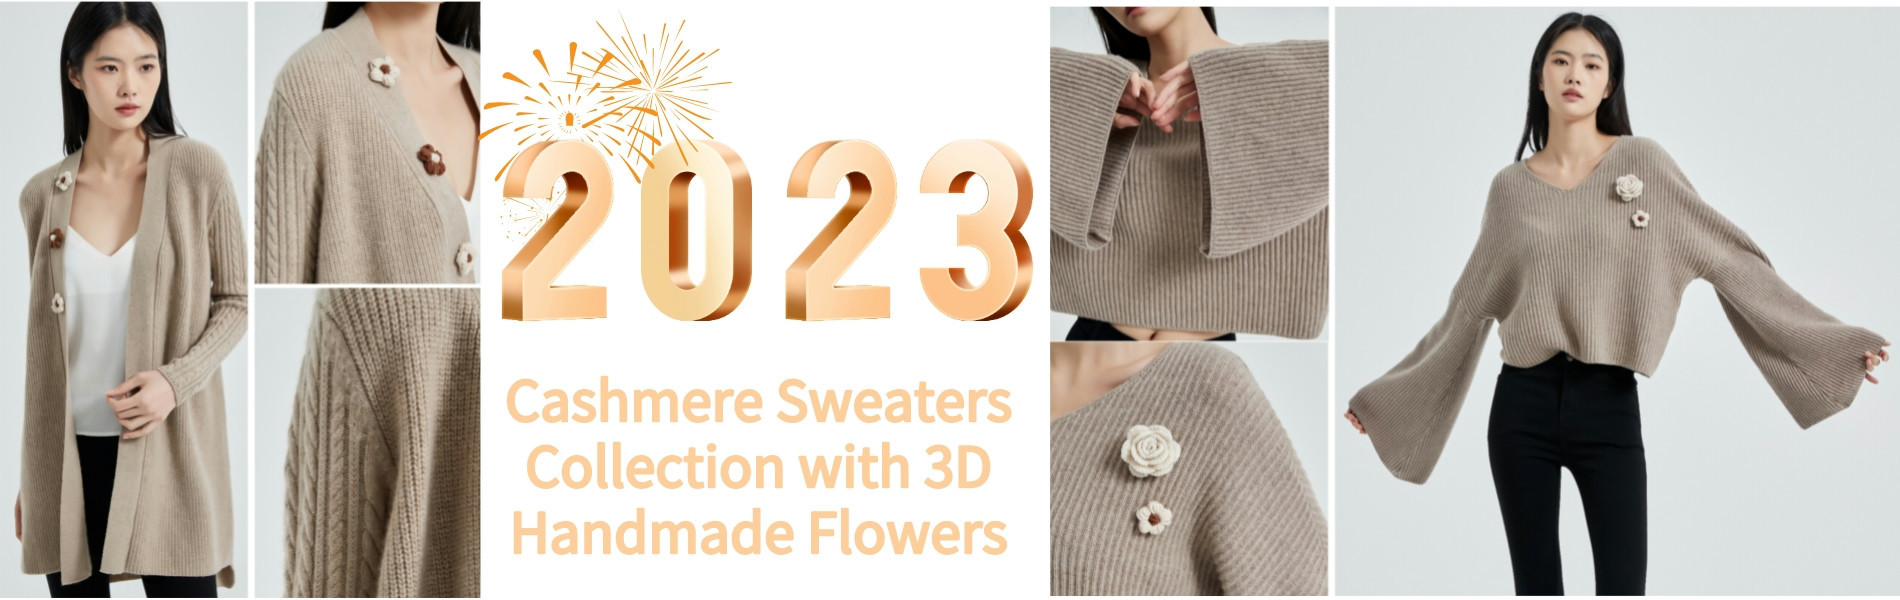 Pure Cashmere sweater with 3D handmade flowers for women